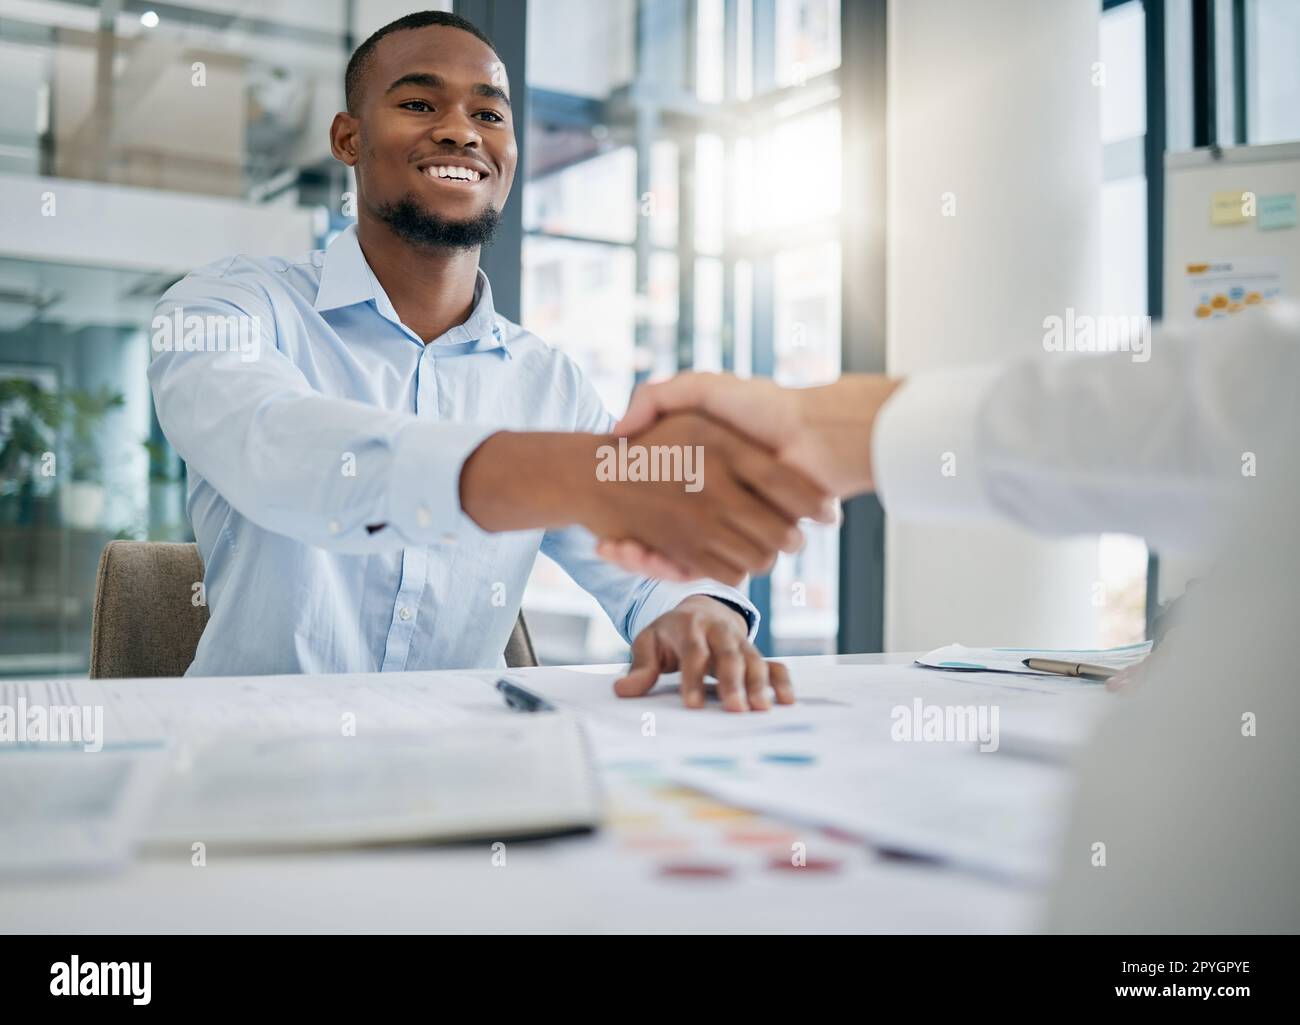 Hiring, designer or black man shaking hands with human resources manager for a successful job interview in office. Handshake, meeting or worker with a happy smile for a job promotion or business deal Stock Photo